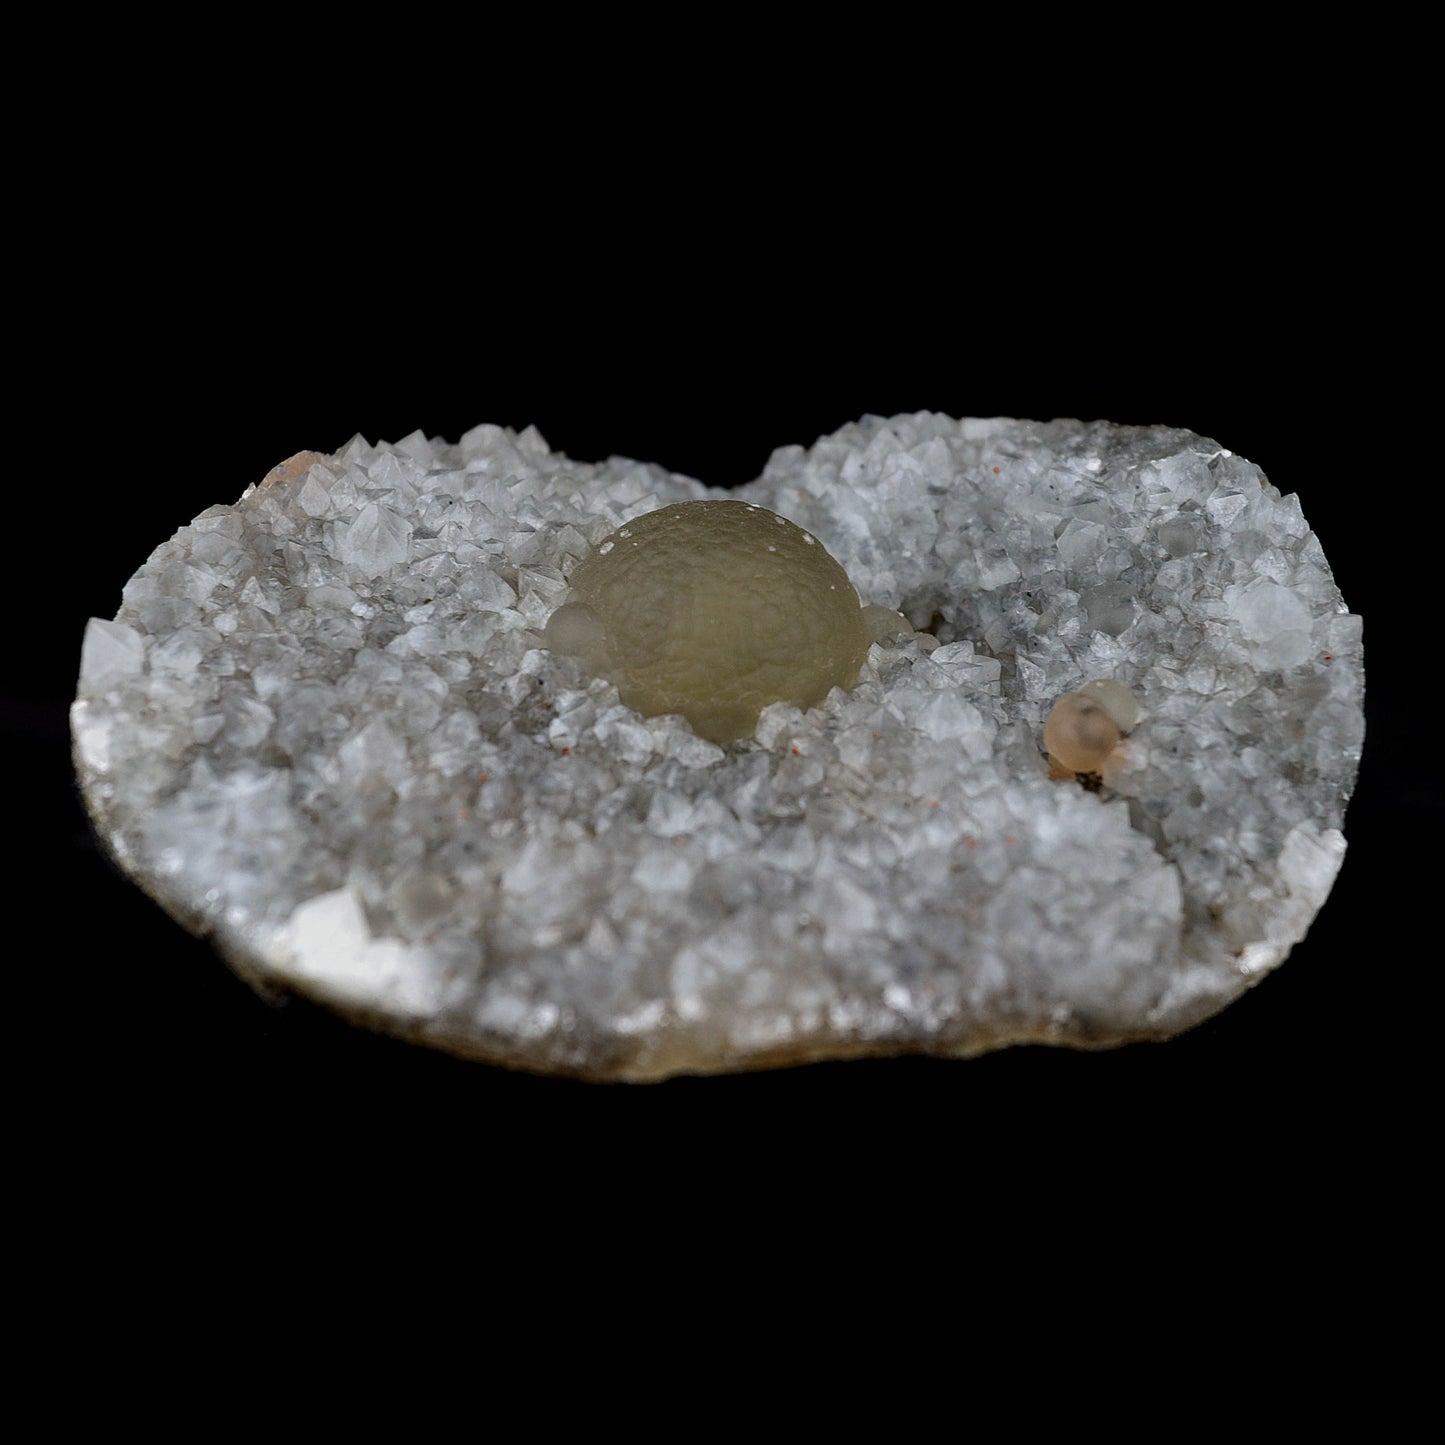 Fluorite Botryoidal on MM Quartz Natural Mineral Specimen # B 3999  https://www.superbminerals.us/products/fluorite-botryoidal-on-mm-quartz-natural-mineral-specimen-b-3999  Features Amazing beautiful yellow botryoidal fluorite partly fused with a MM Quartz crystals. The whole is in a geode covered with quartz. An asset to your collection. Primary Mineral(s):&nbsp; Fluorite Secondary Mineral(s): MM QuartzMatrix: N/A8 cm x 6 cm170 GmsLocality: Aurangabad, Maharashtra, India